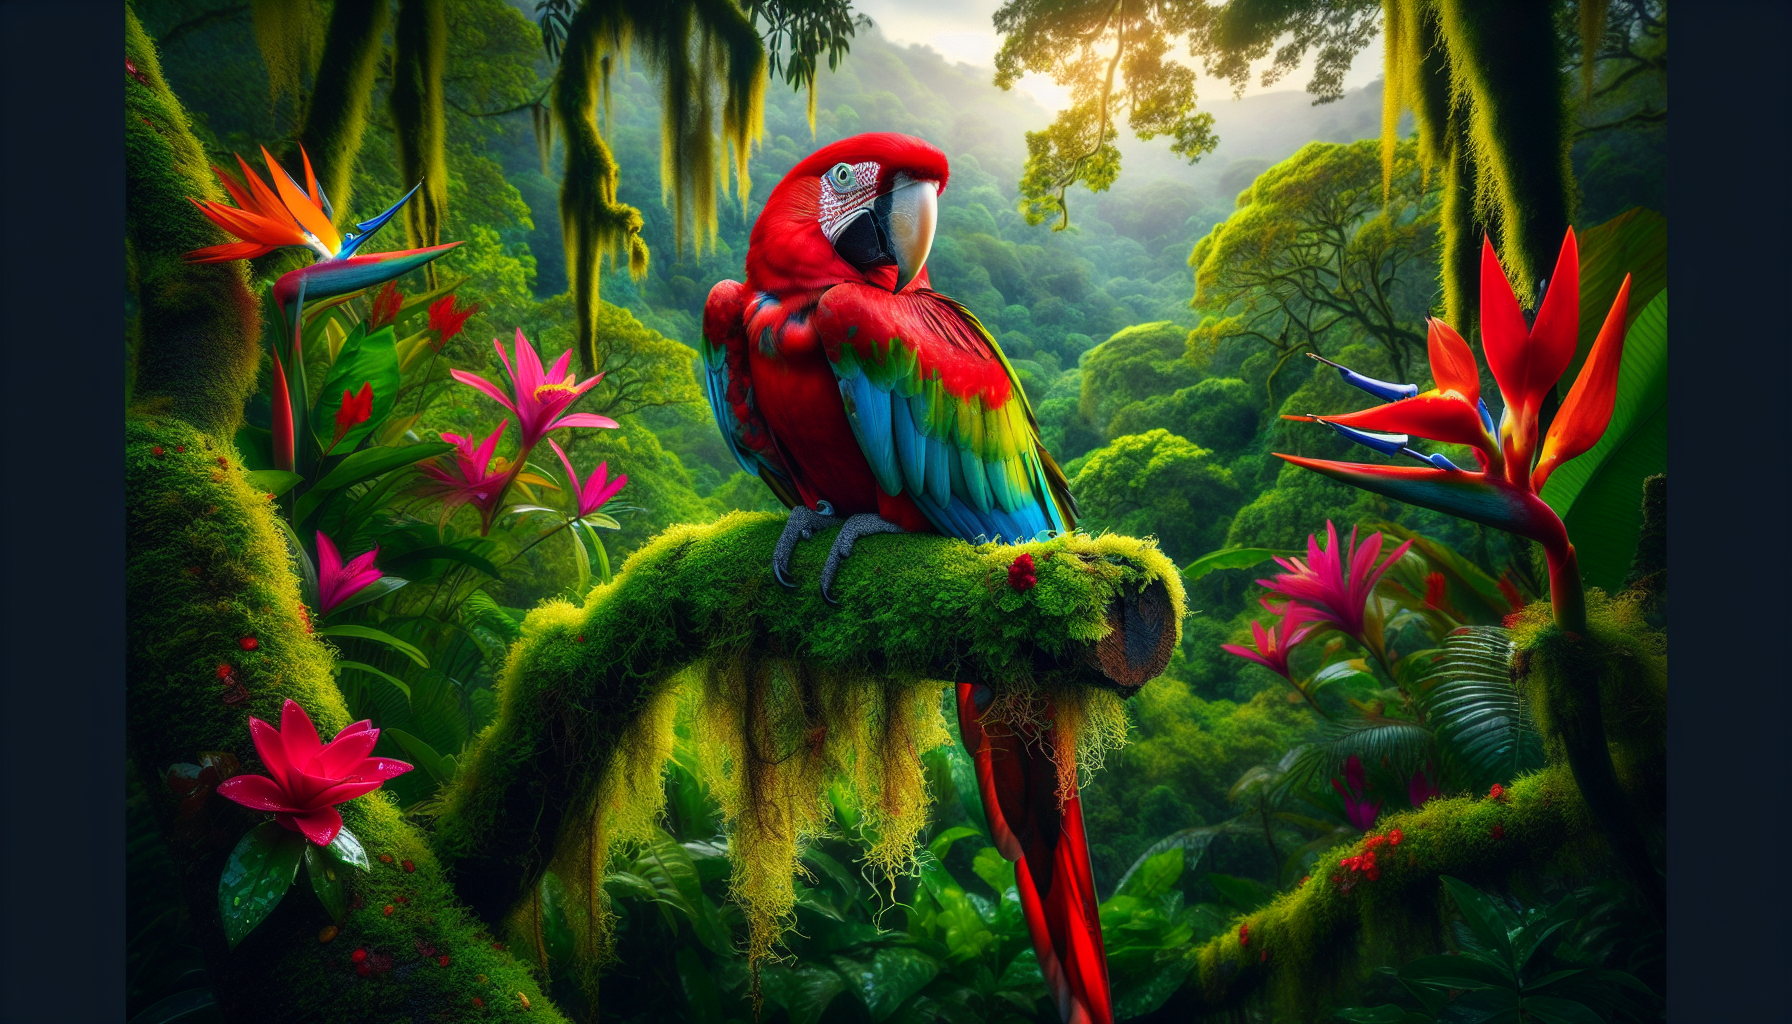 Colorful Scarlet Macaw in Costa Rica's Rainforest